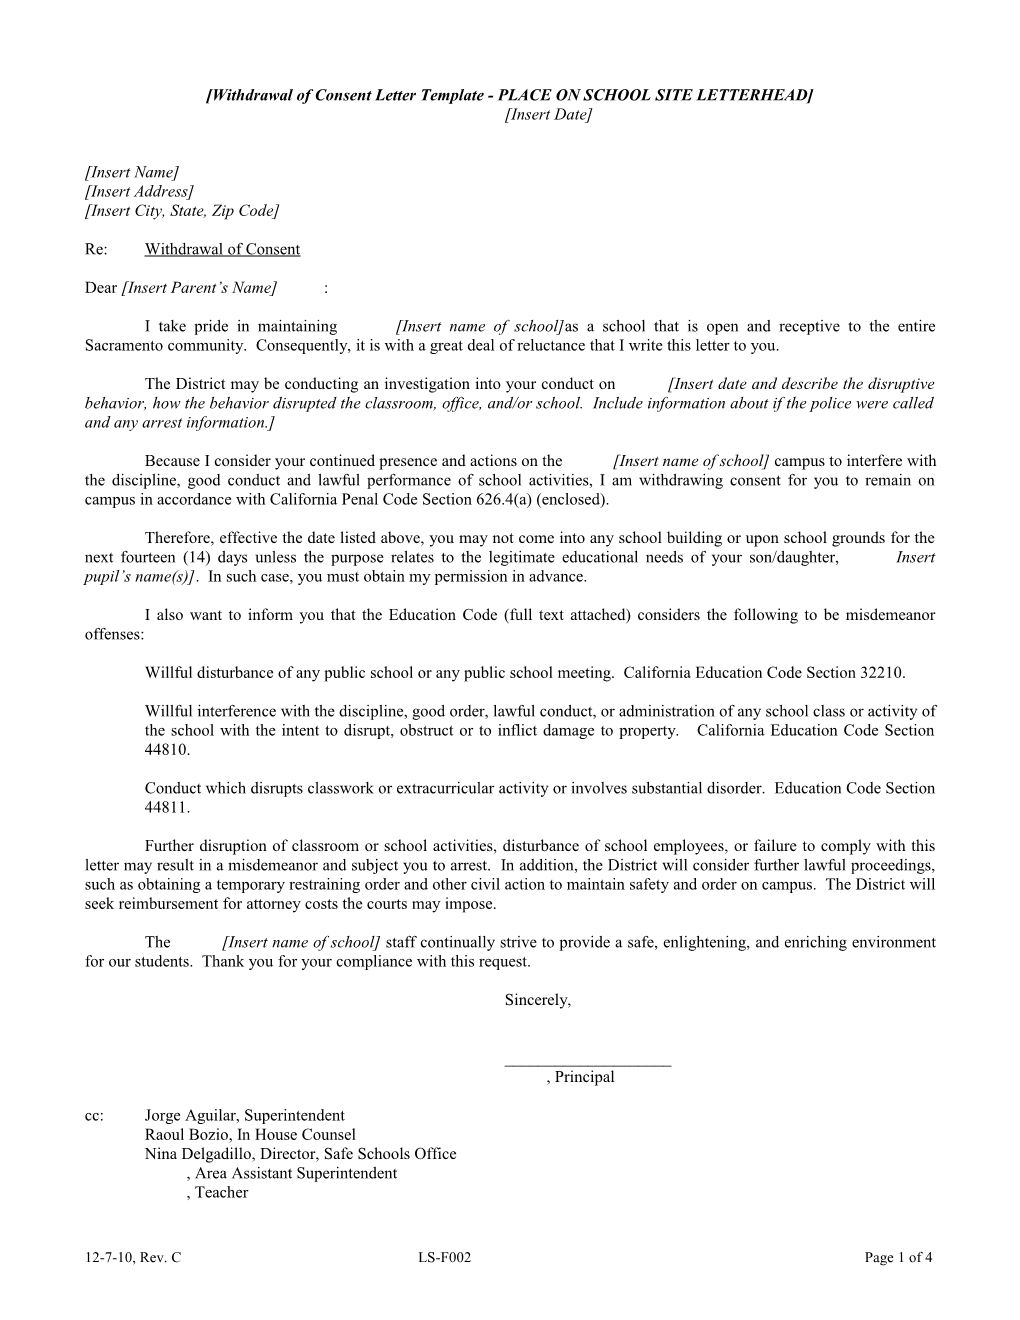 Withdrawal of Consent Letter Template - PLACE on SCHOOL SITE LETTERHEAD